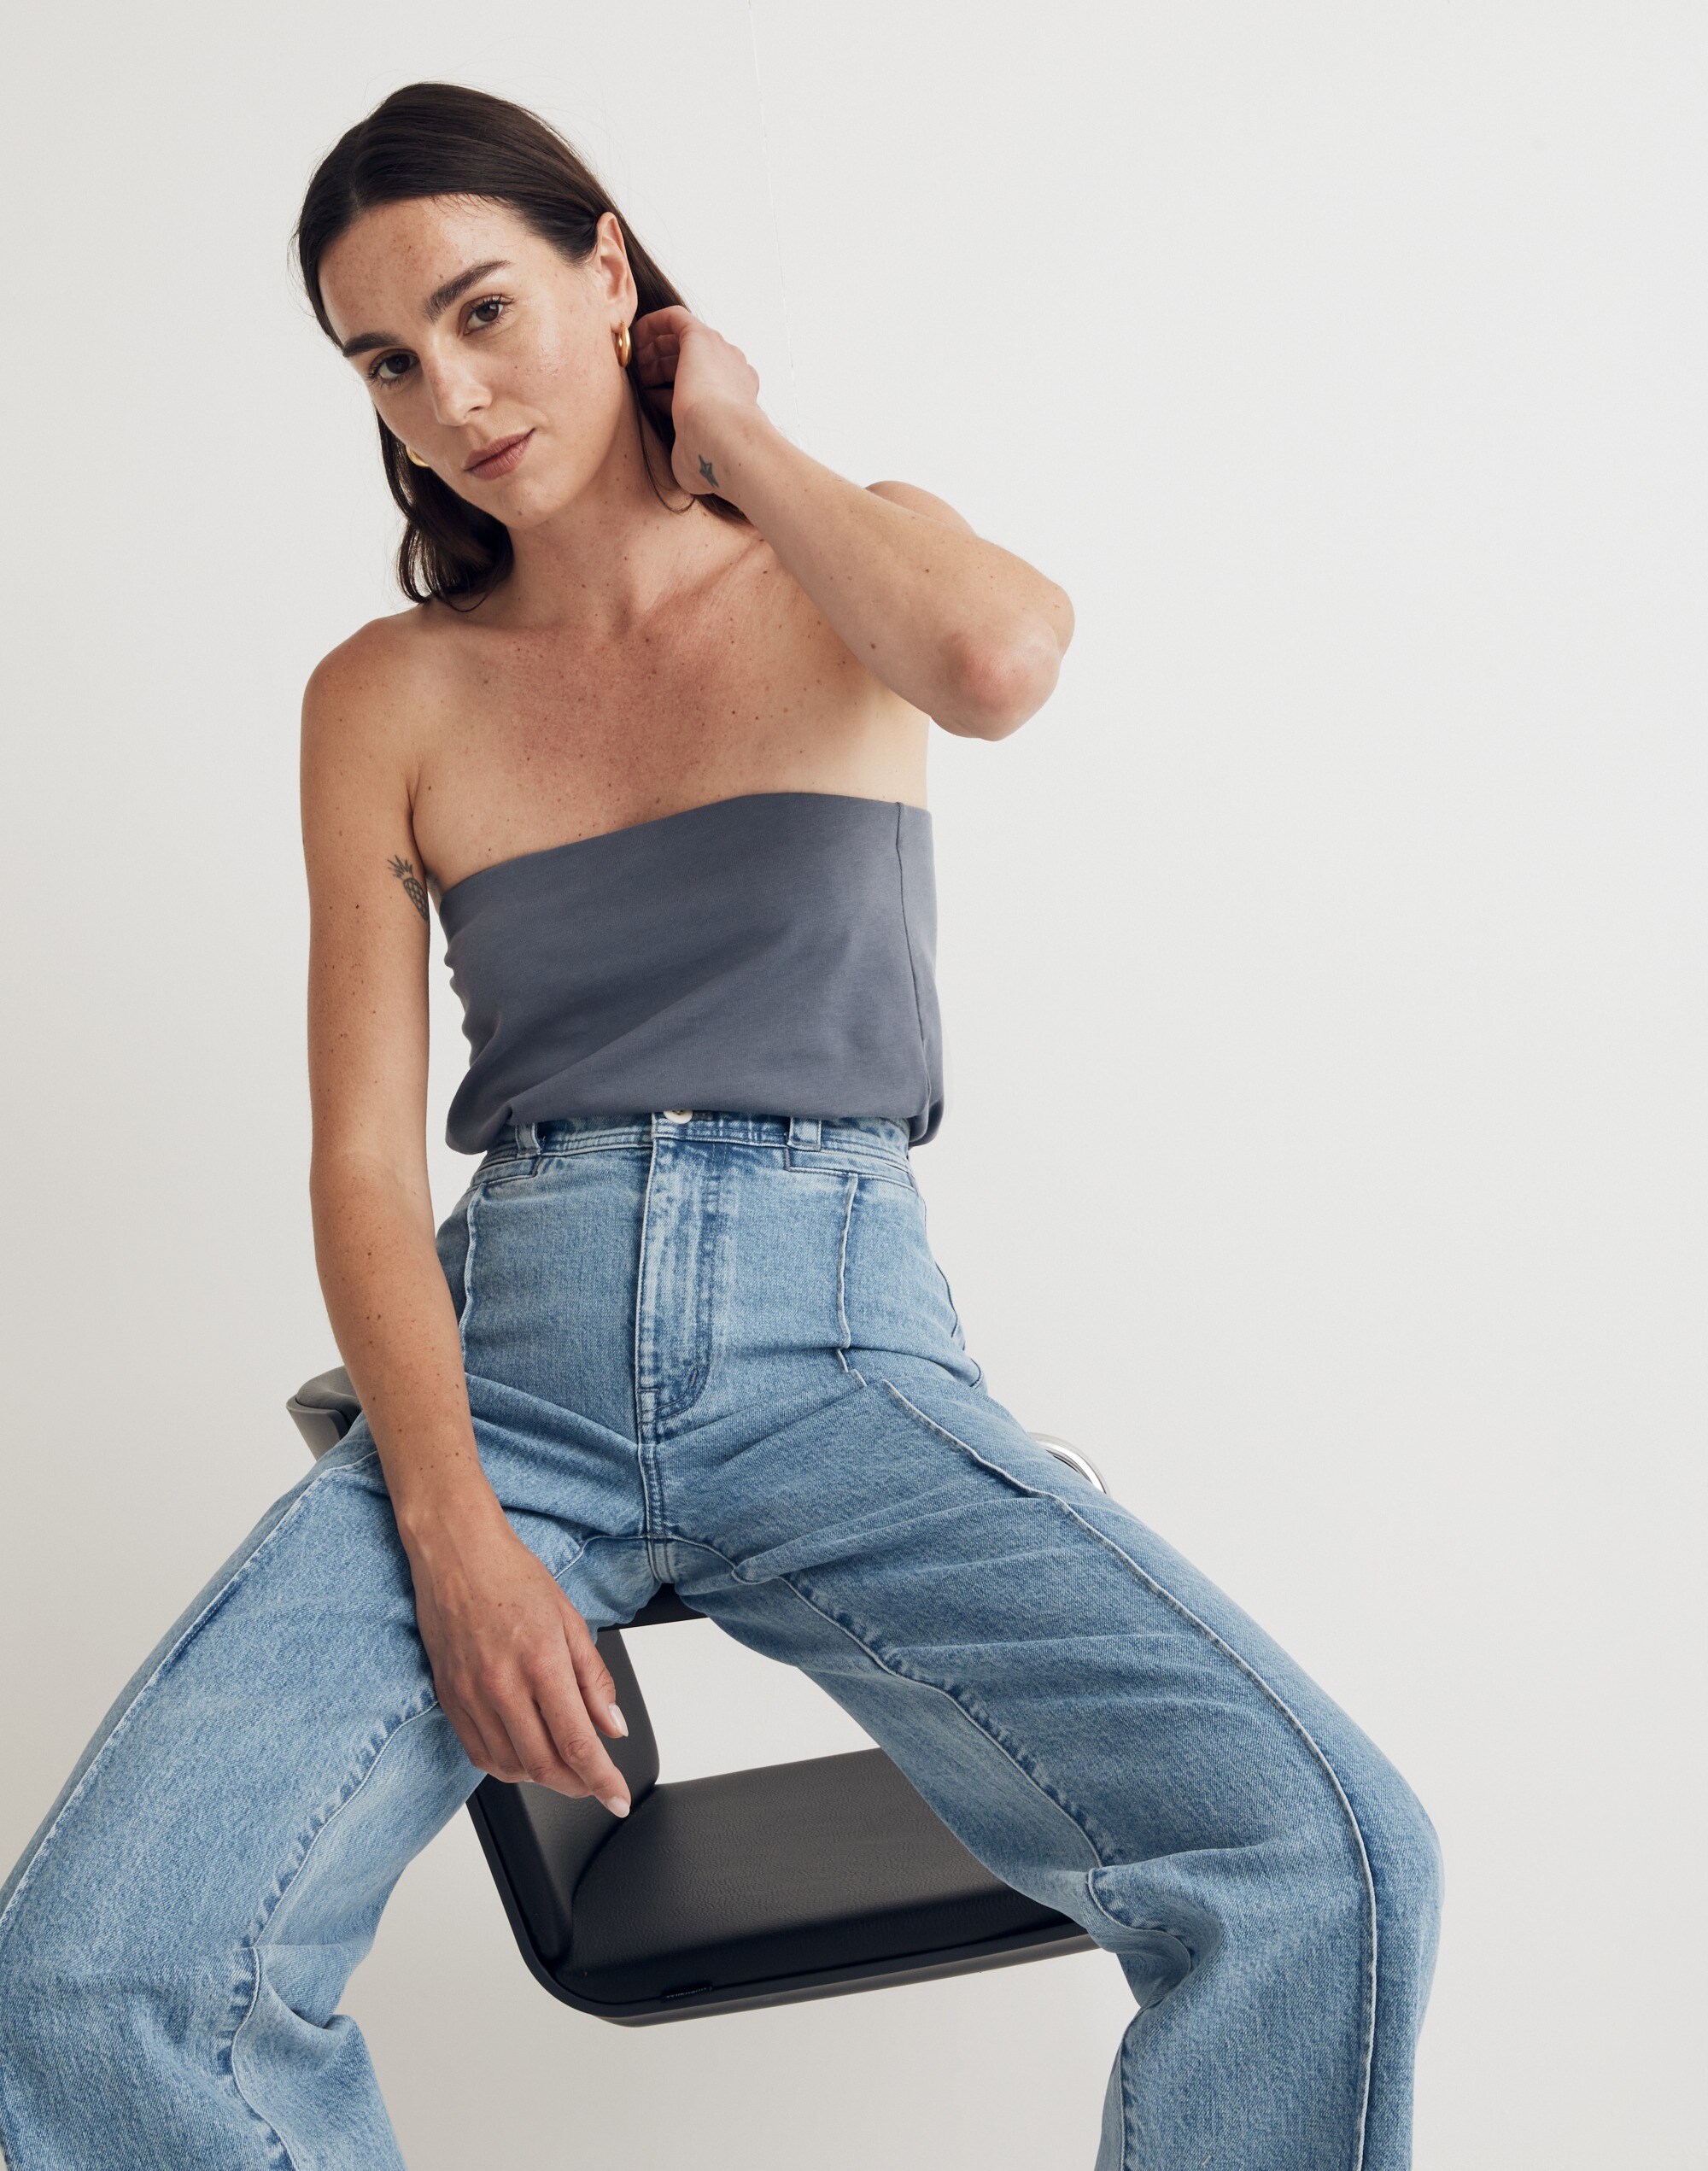 The Perfect Vintage Wide-Leg Jean in Paradelle Wash: Pintuck Edition